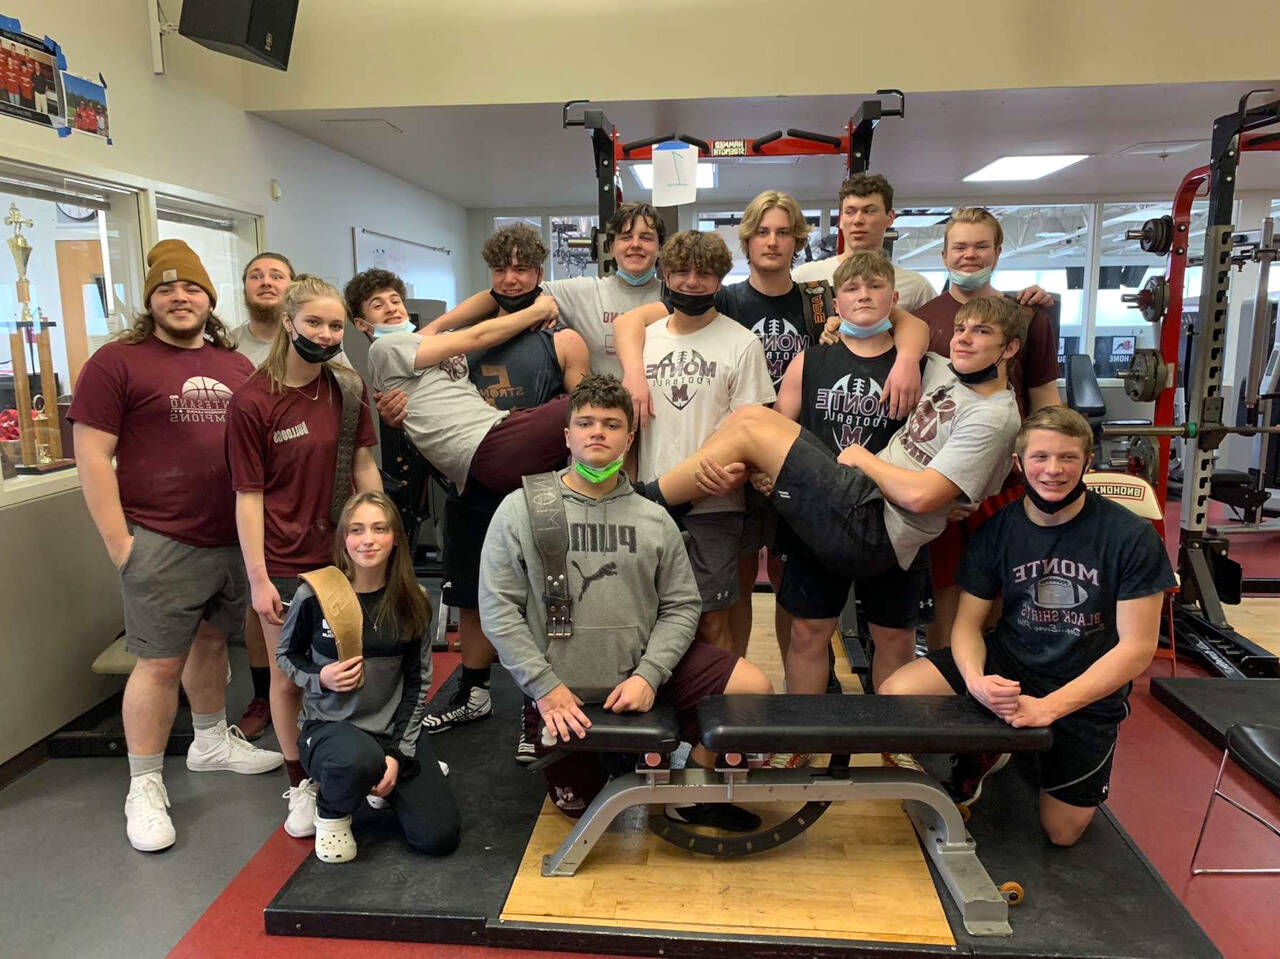 SUBMITTED PHOTO The Montesano powerlifting team poses for a photo after a successful meet in Snohomish on Saturday, March 5, 2022.